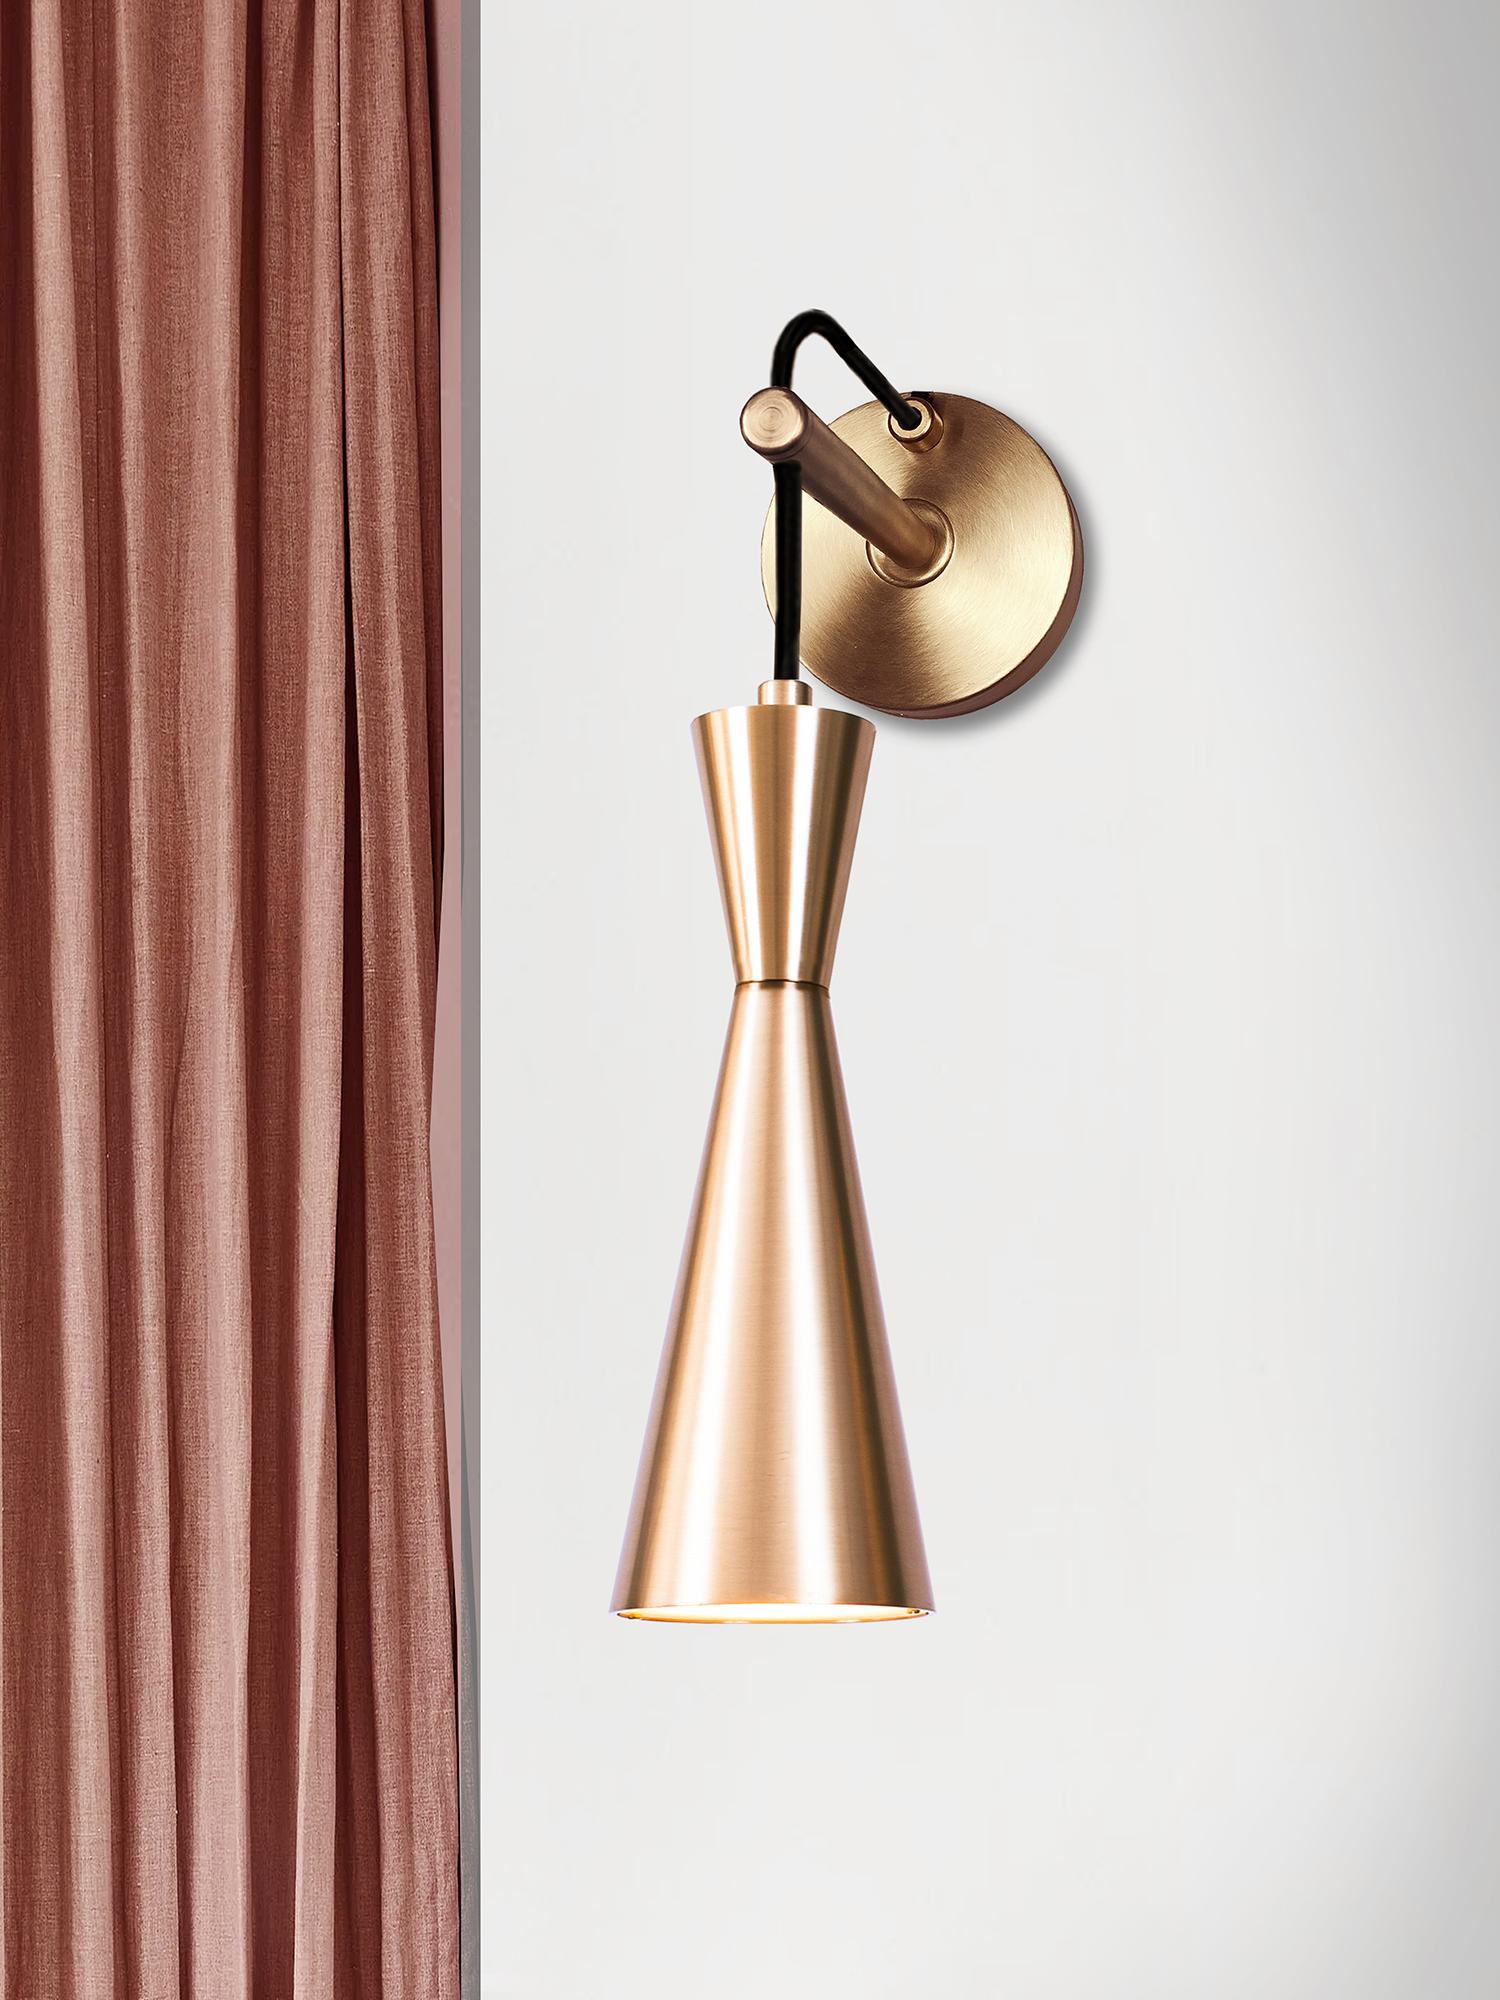 Cone is designed to showcase the beauty and timeless elegance of geometrical symmetry. Each cone is machined from a solid block of brass.

Size: H 48cm (18.9in) x W 30cm (11.8in) x D 35cm (13.8in)
GU10 LED Bulb.